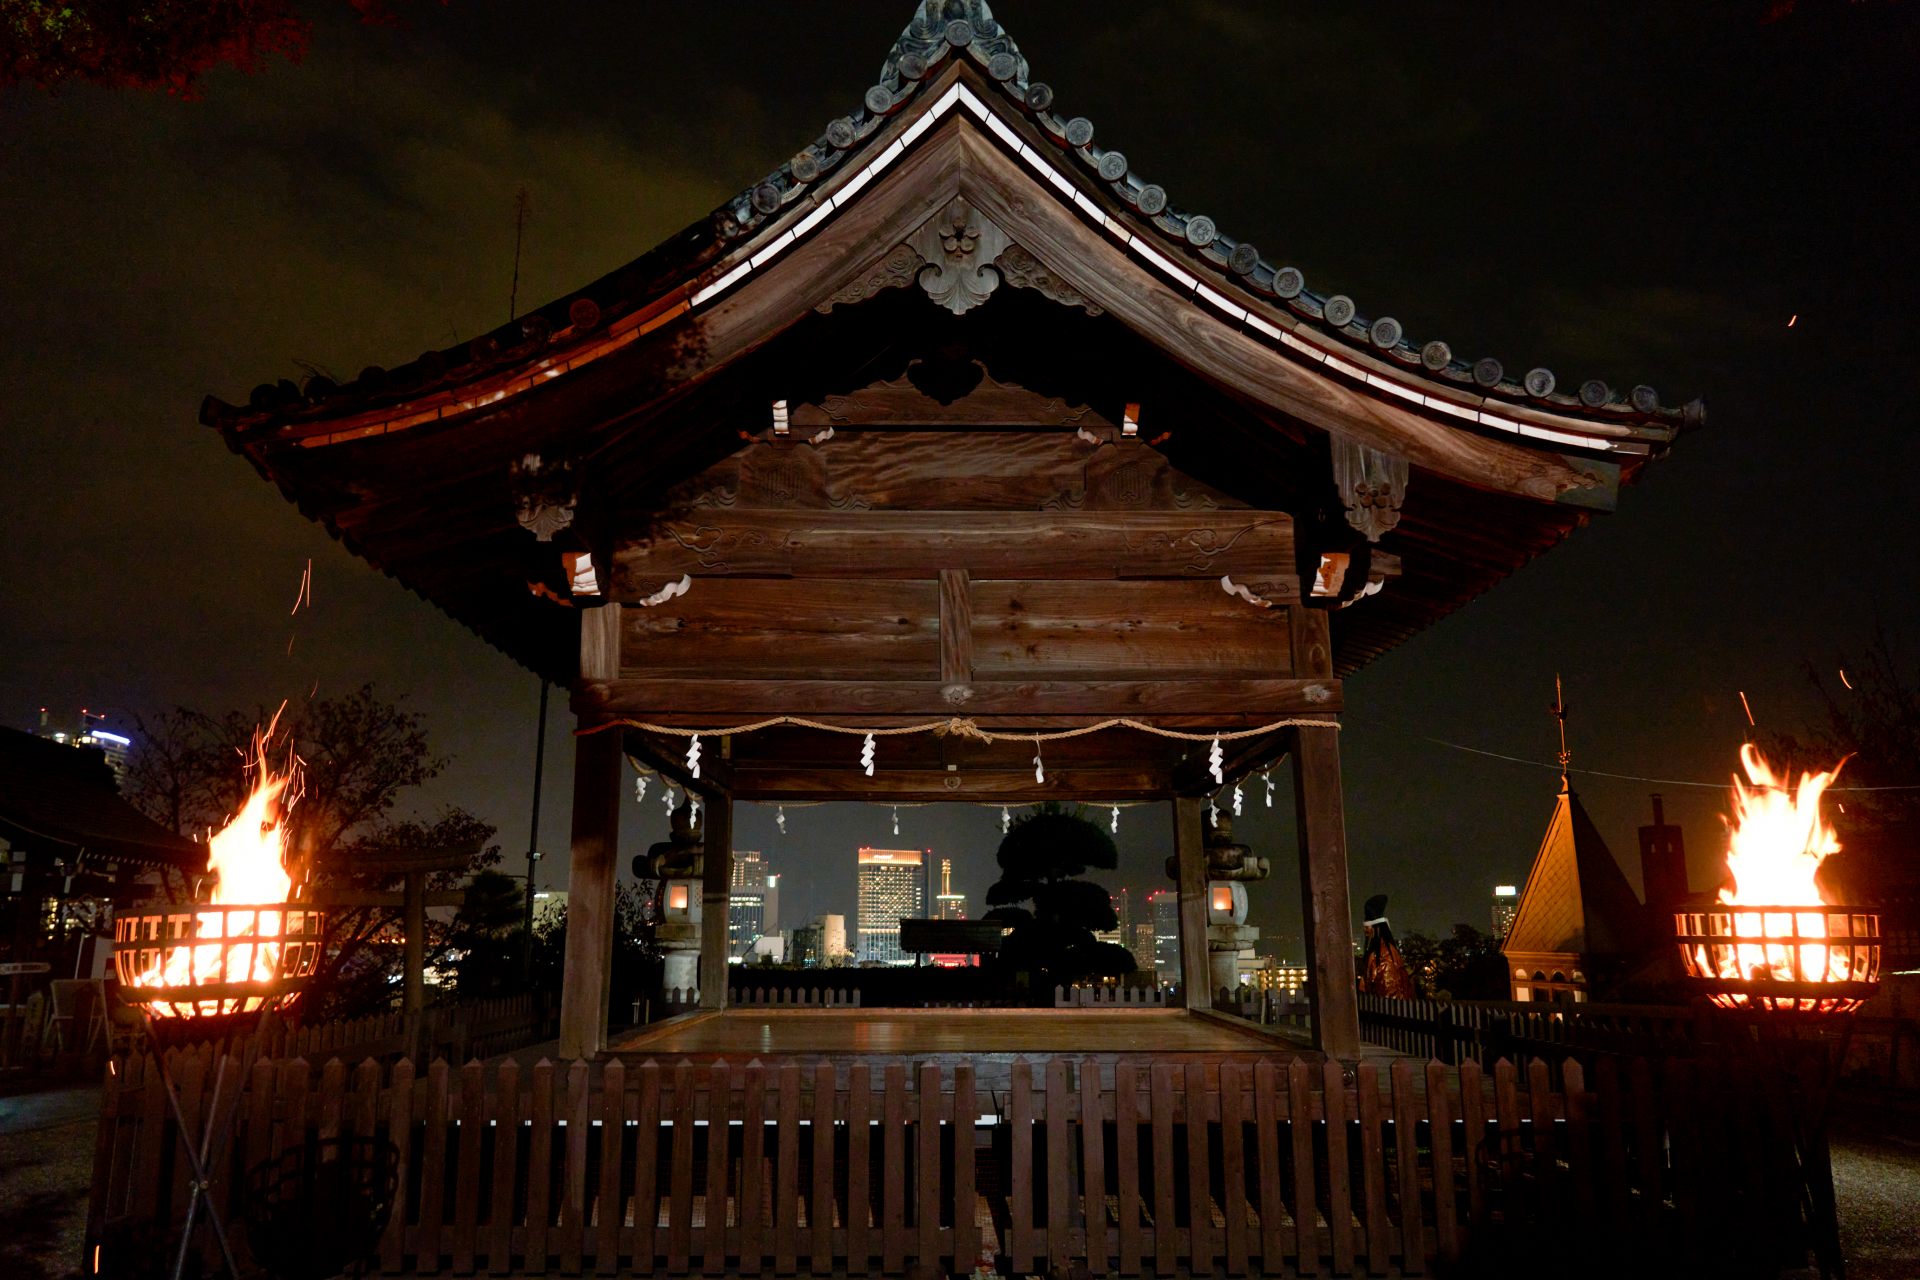 The Noh stage is illuminated by bonfire flames while Kobe’s night landscape makes up the backdrop.